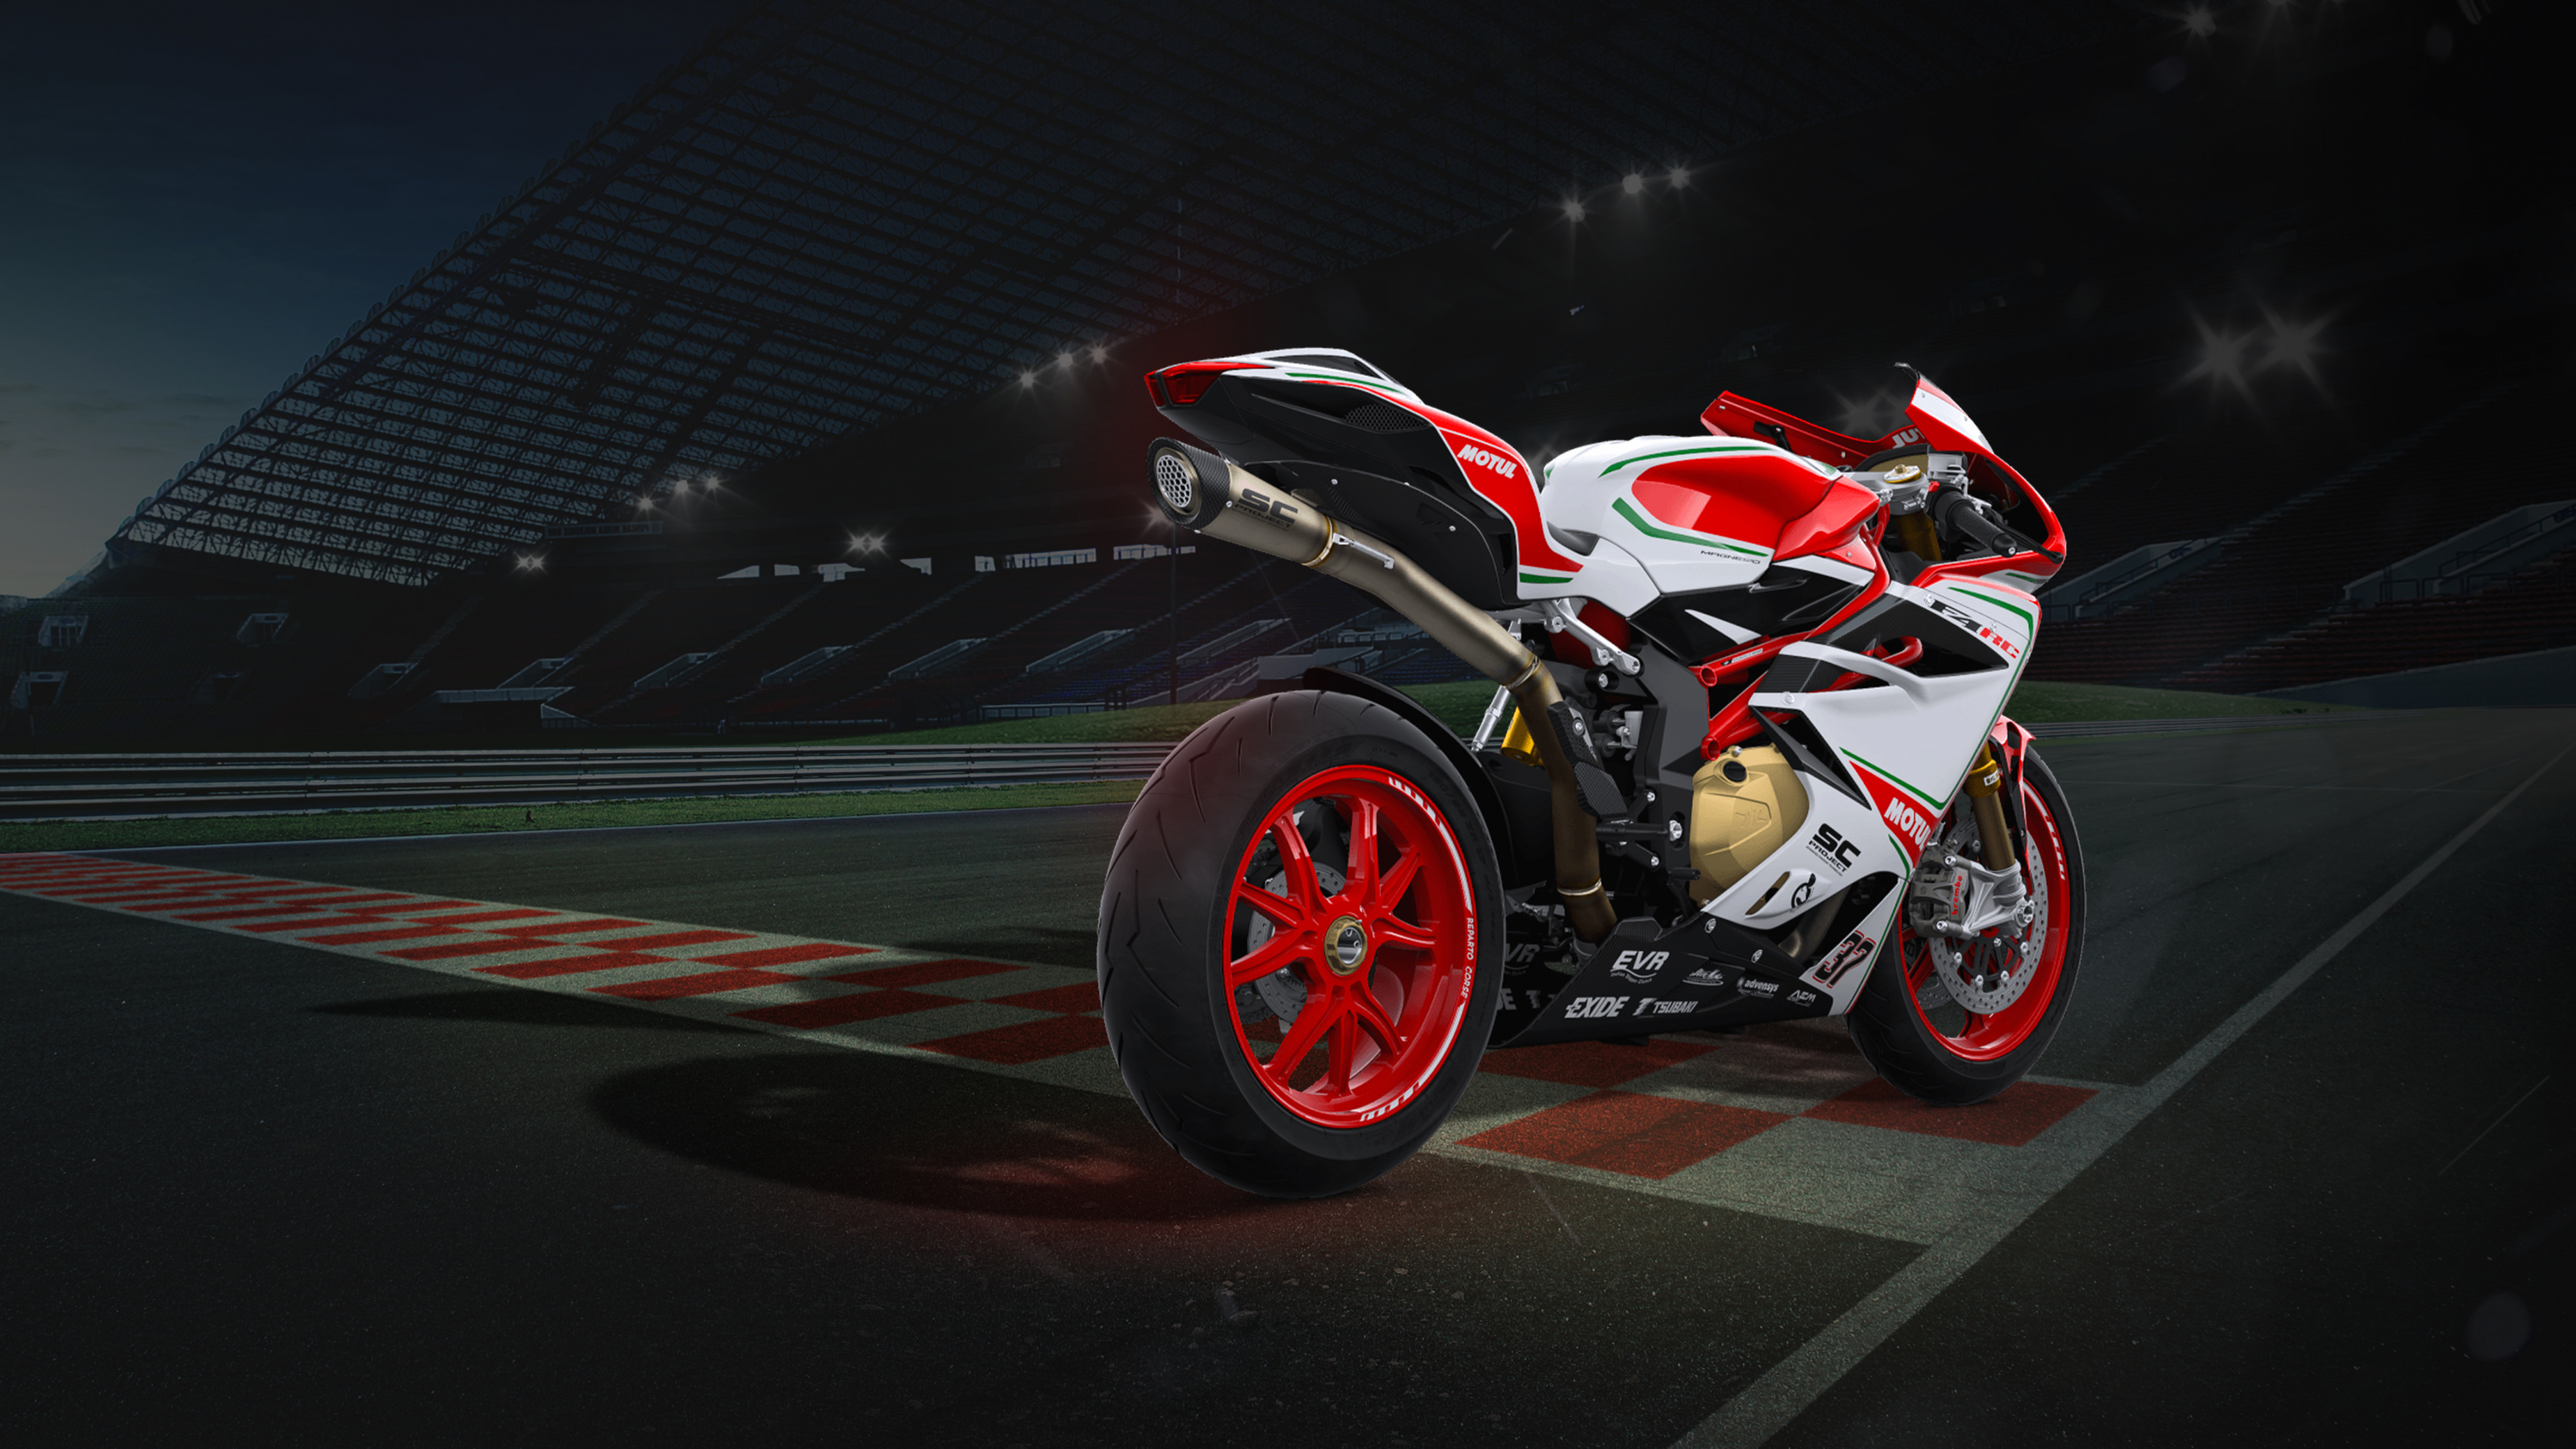 Red and White Sports Bike on Track Field. Wallpaper in 3840x2160 Resolution